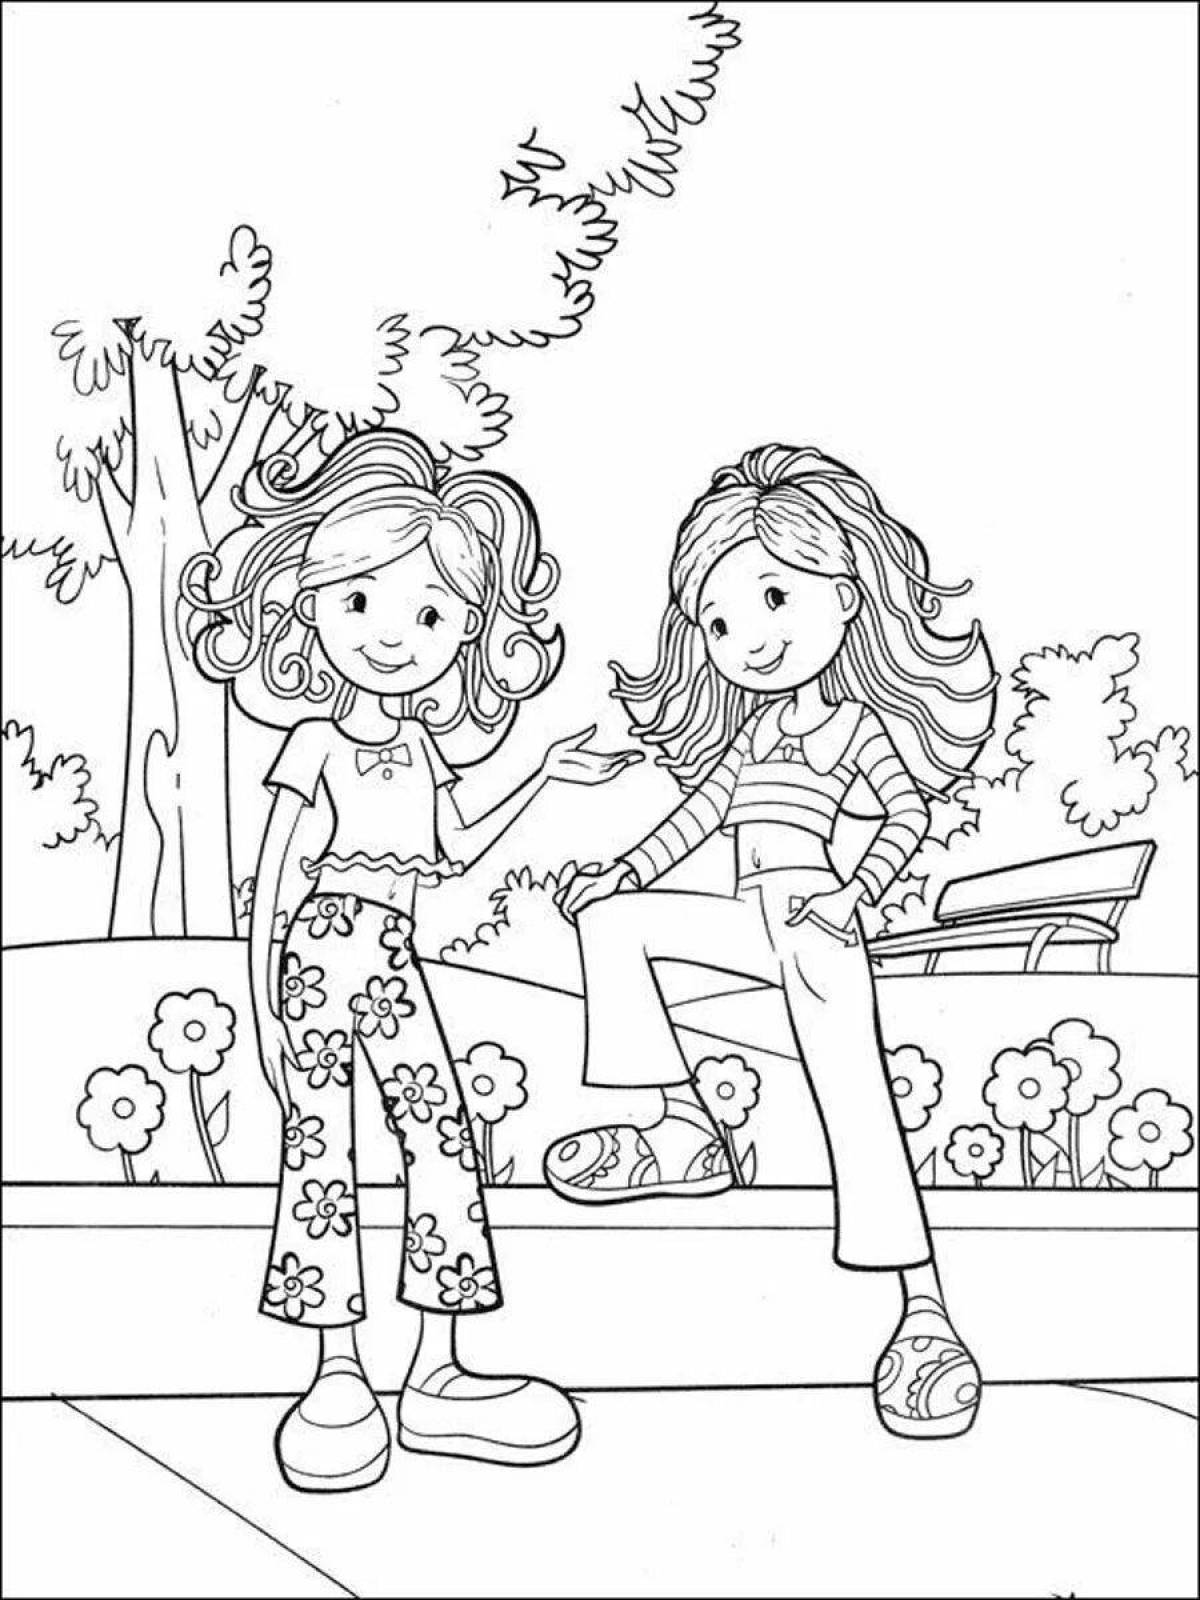 Two sisters funny coloring book